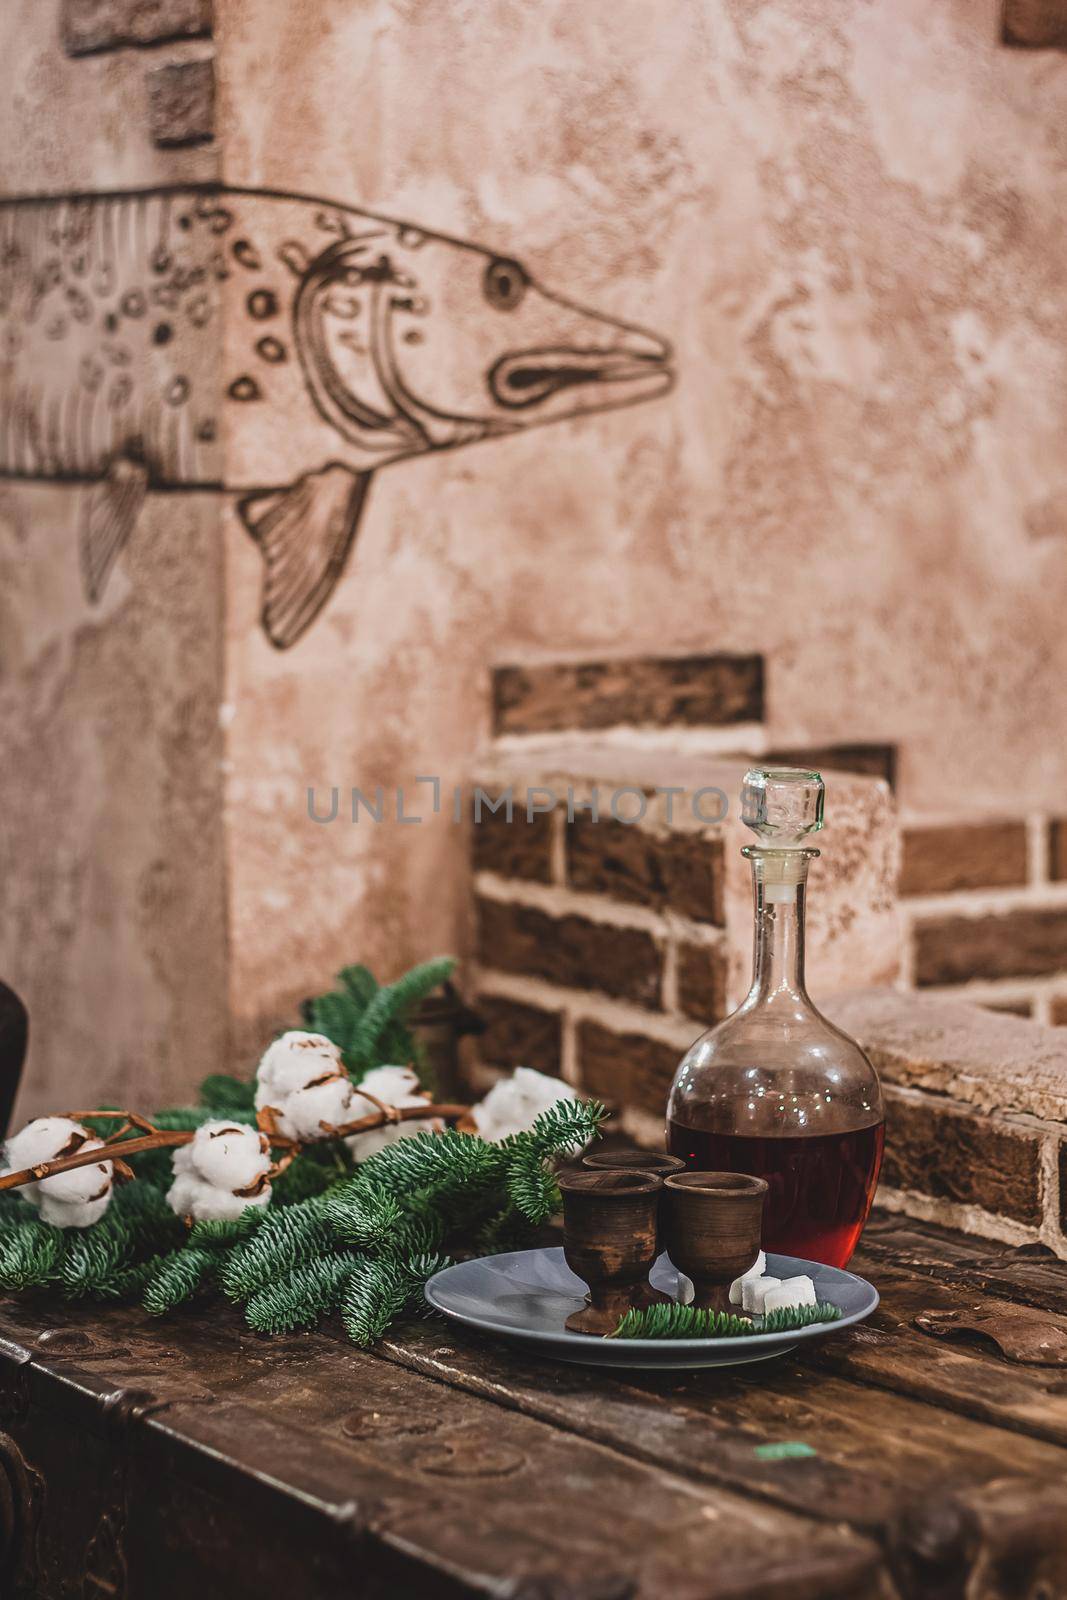 Christmas vintage background, craft alcohol drink and ancient dishes, fluffy fir branches and festive decor. by mmp1206